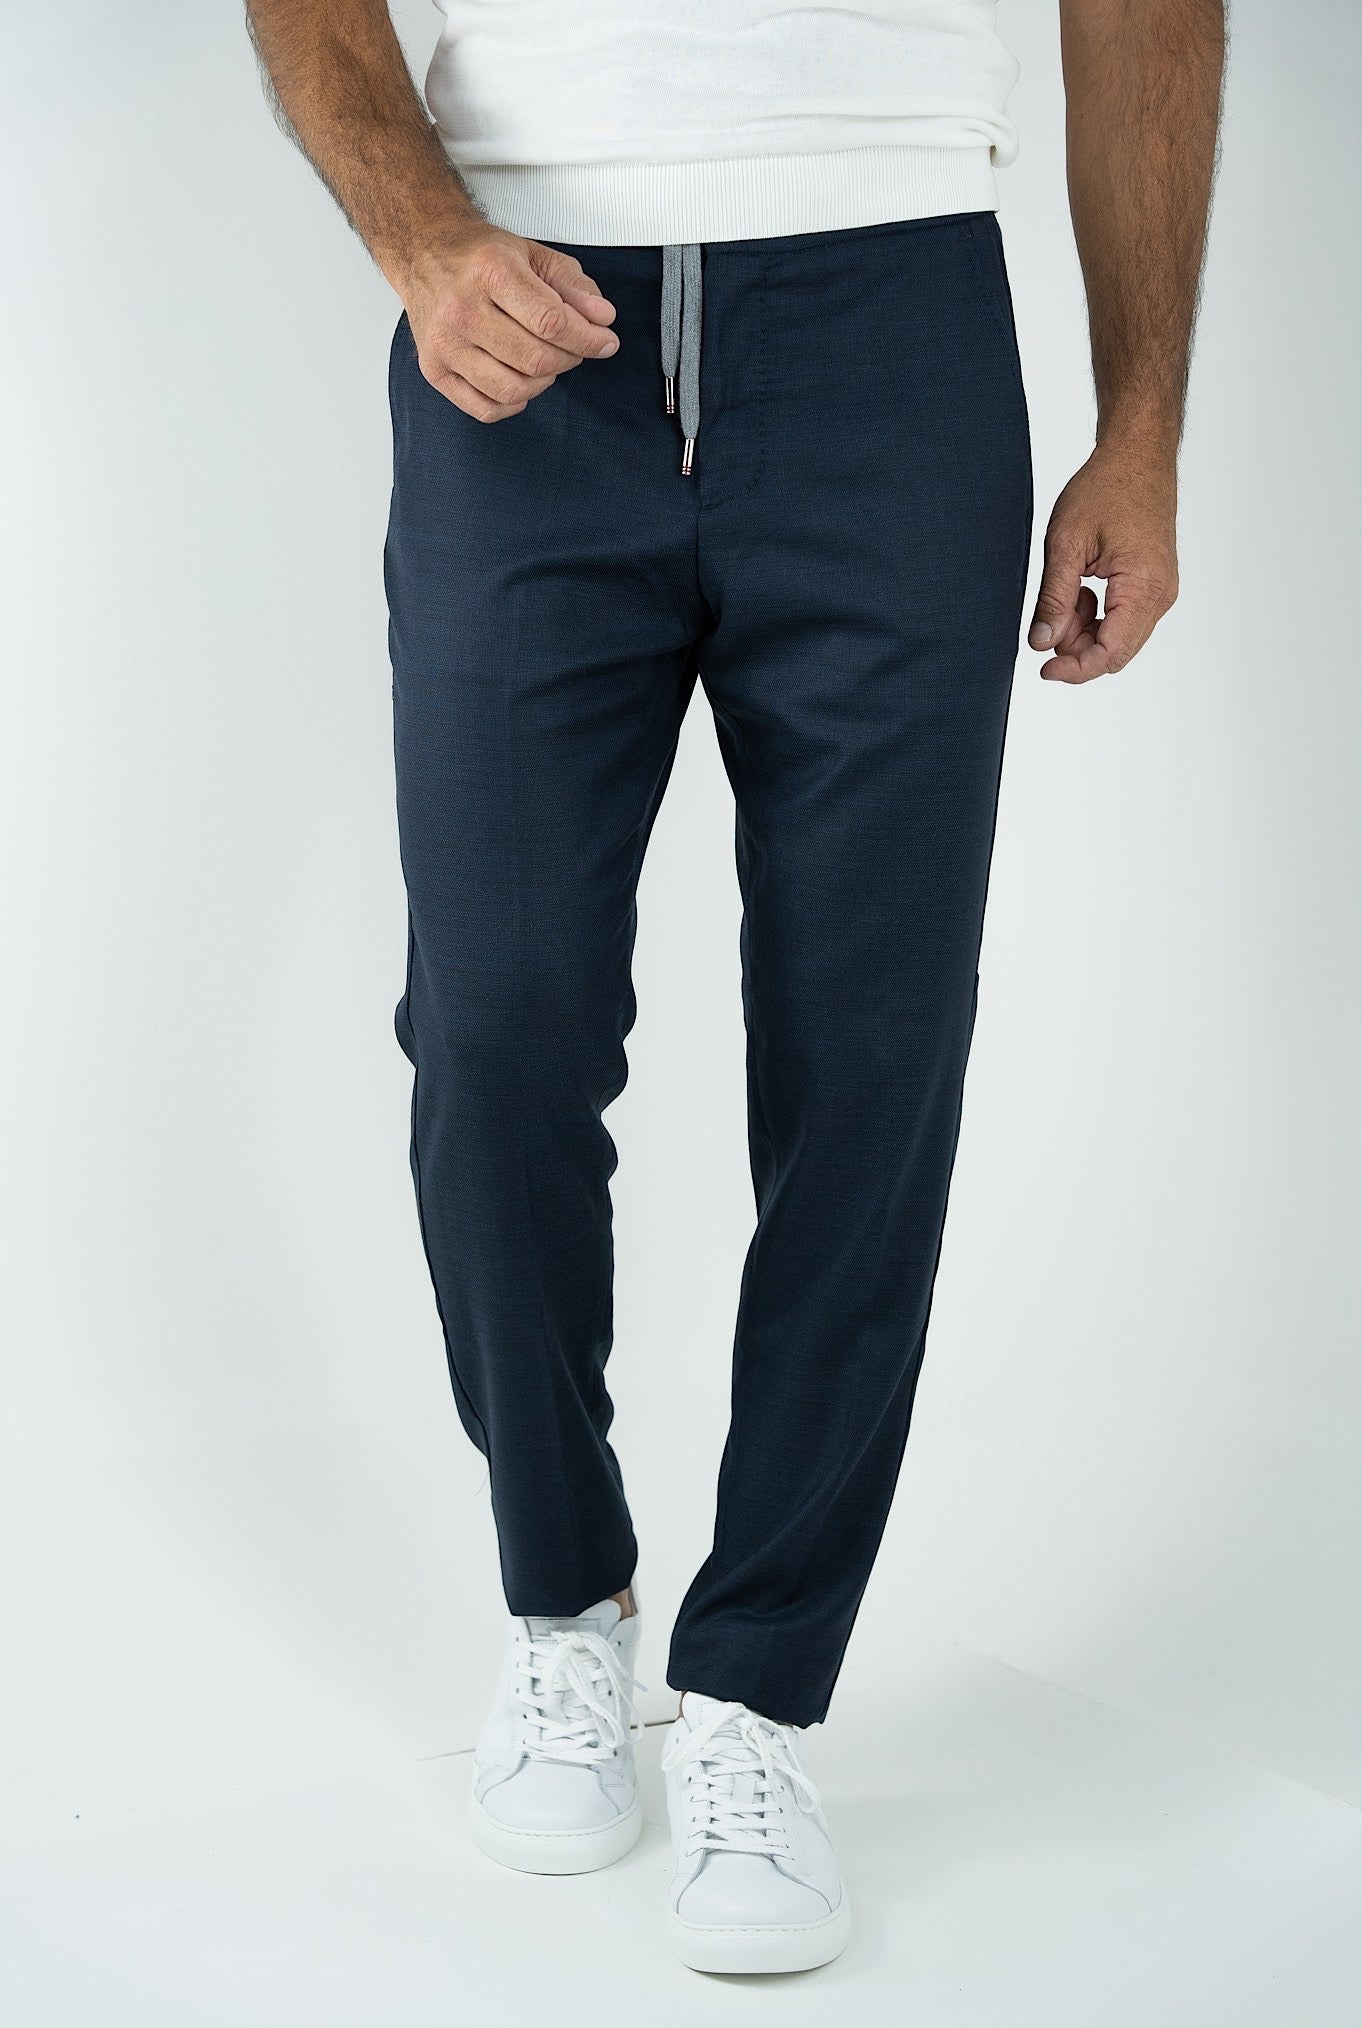 MARCO PESCAROLO Trousers with Drawstring Super 130's Dark Blue Wool